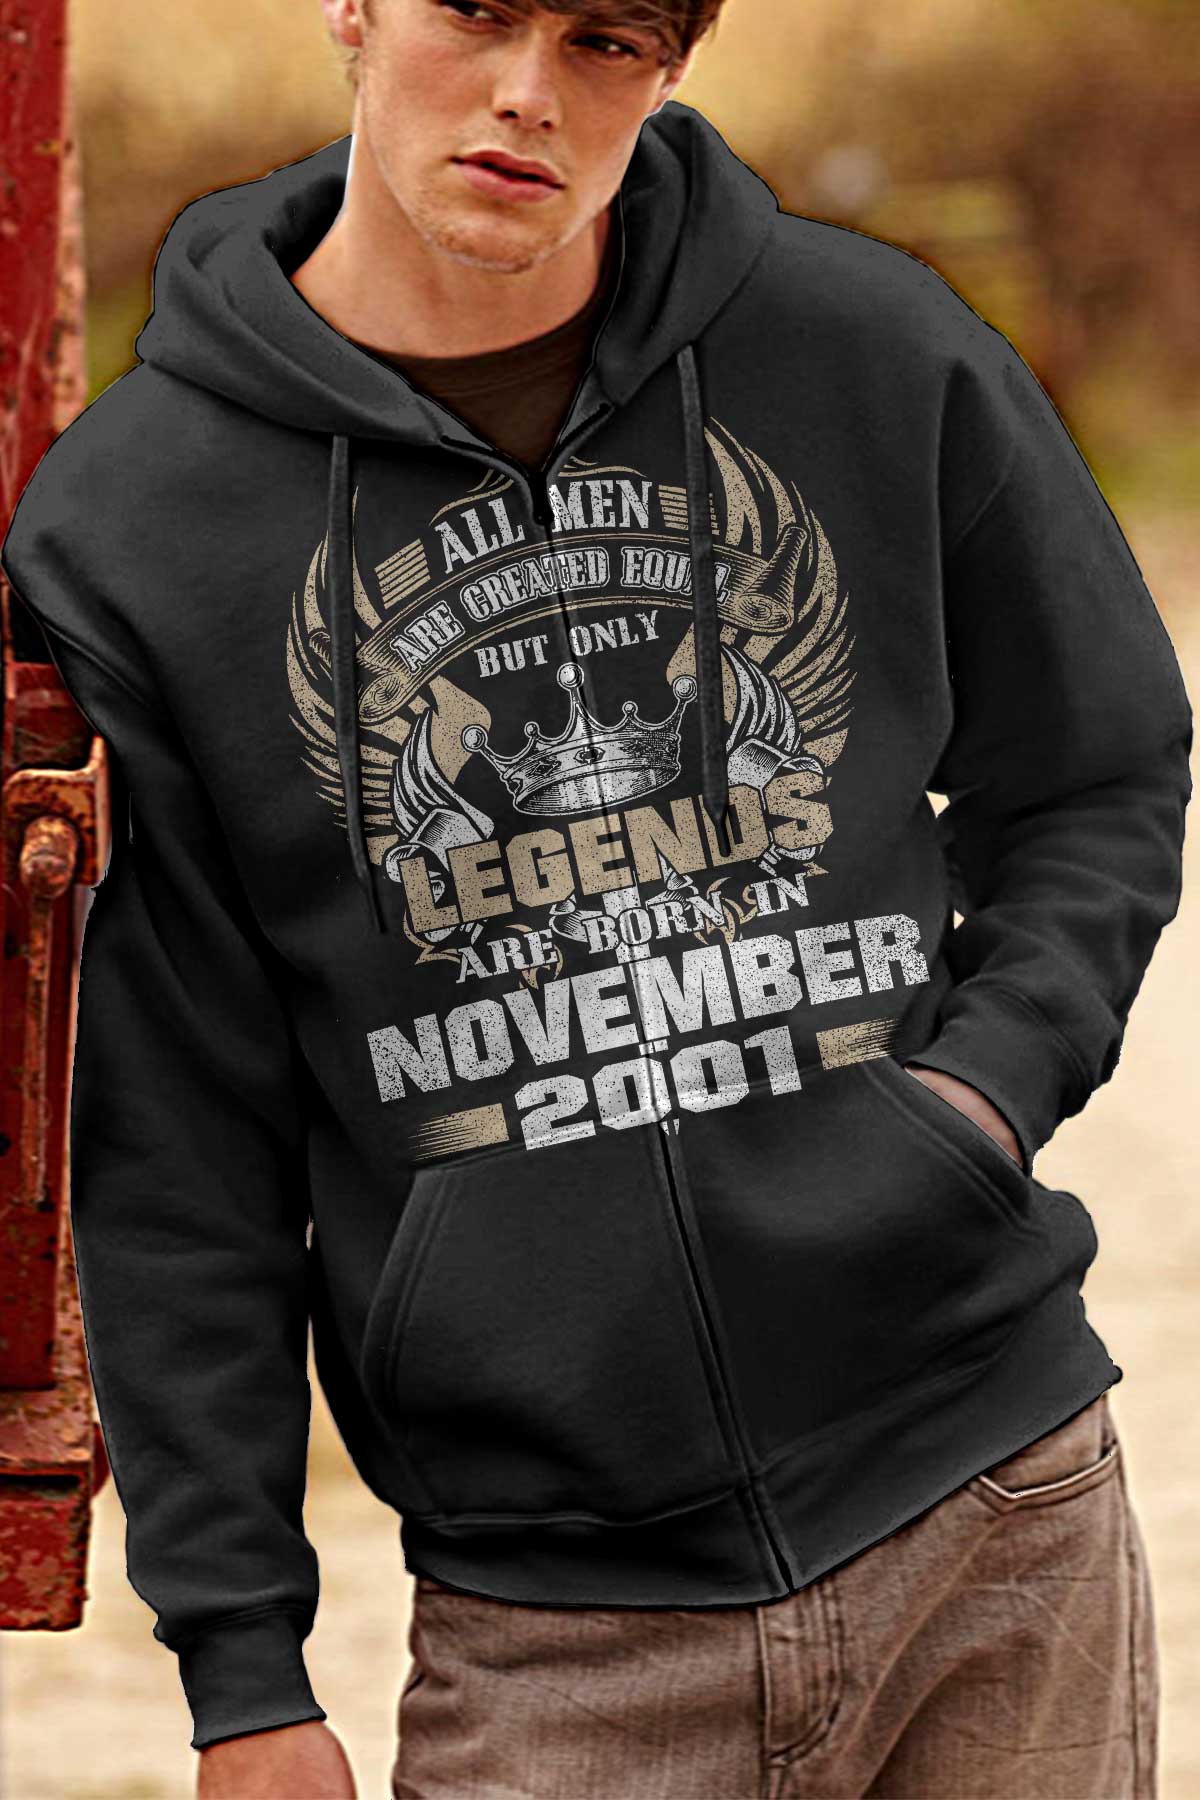 All man equal, but Legend... - for a birthday with a month and a year to order - a T-shirt, blouse or sweatshirt-liratech.eu